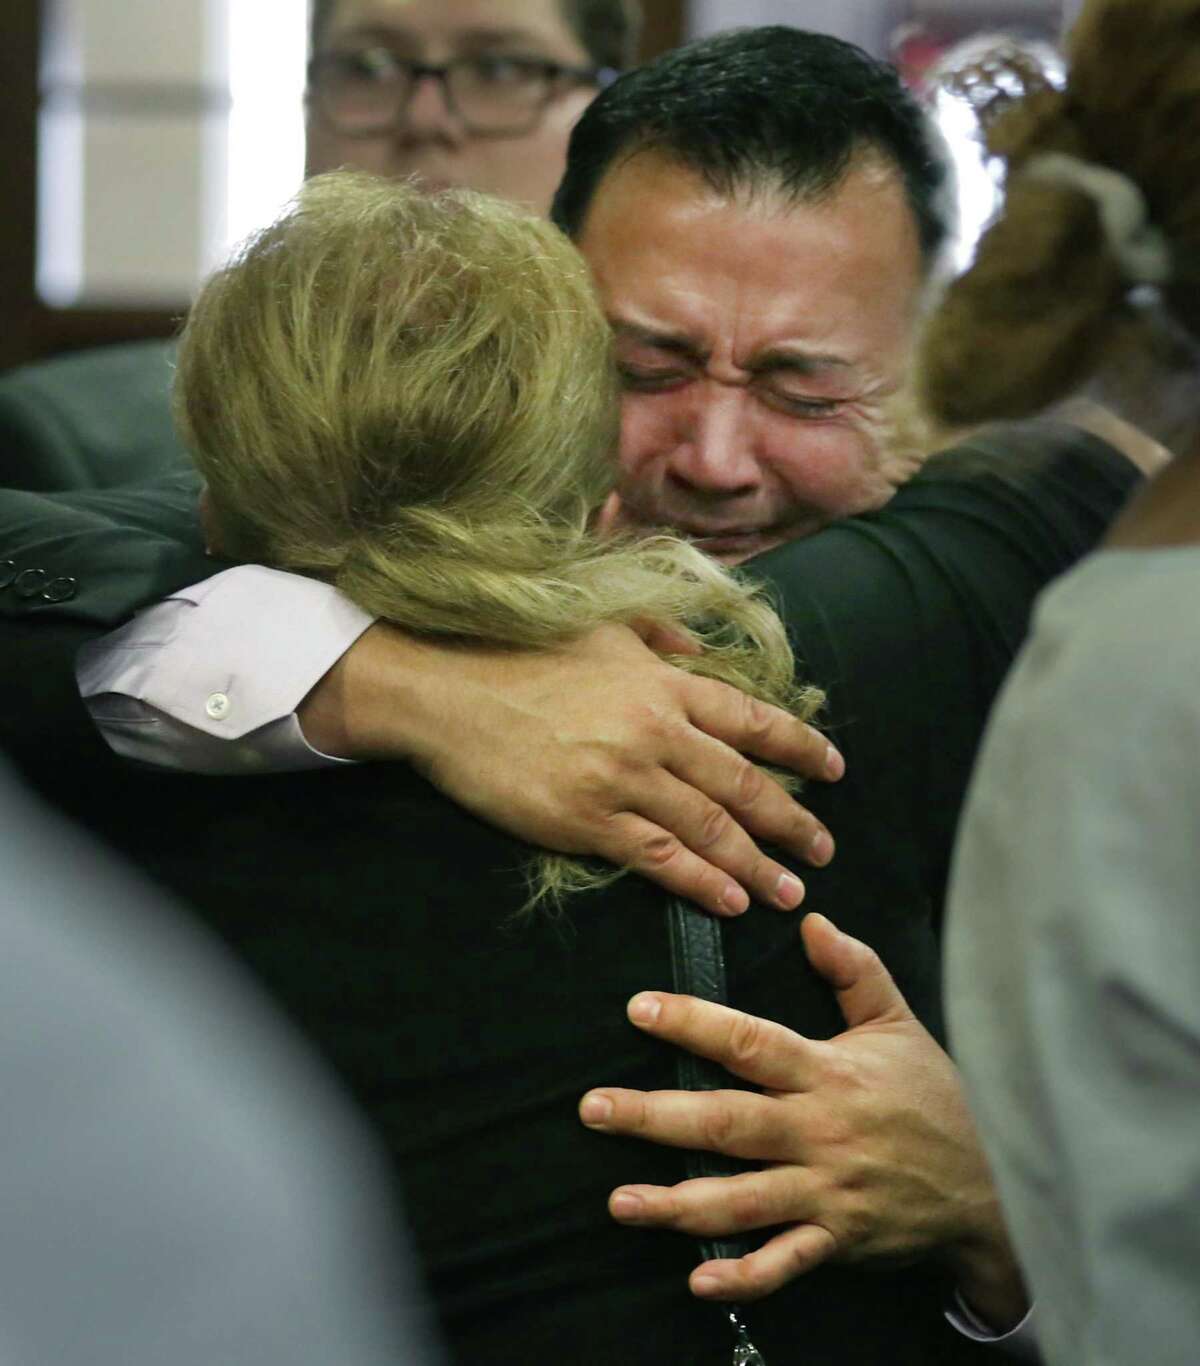 Gene Vargas, father of Jared Vargas, is embraced by neighbor Yolanda Martinez following the guilty verdict Tuesday against Ernesto Esquivel-Garcia, who killed the younger Vargas last year.